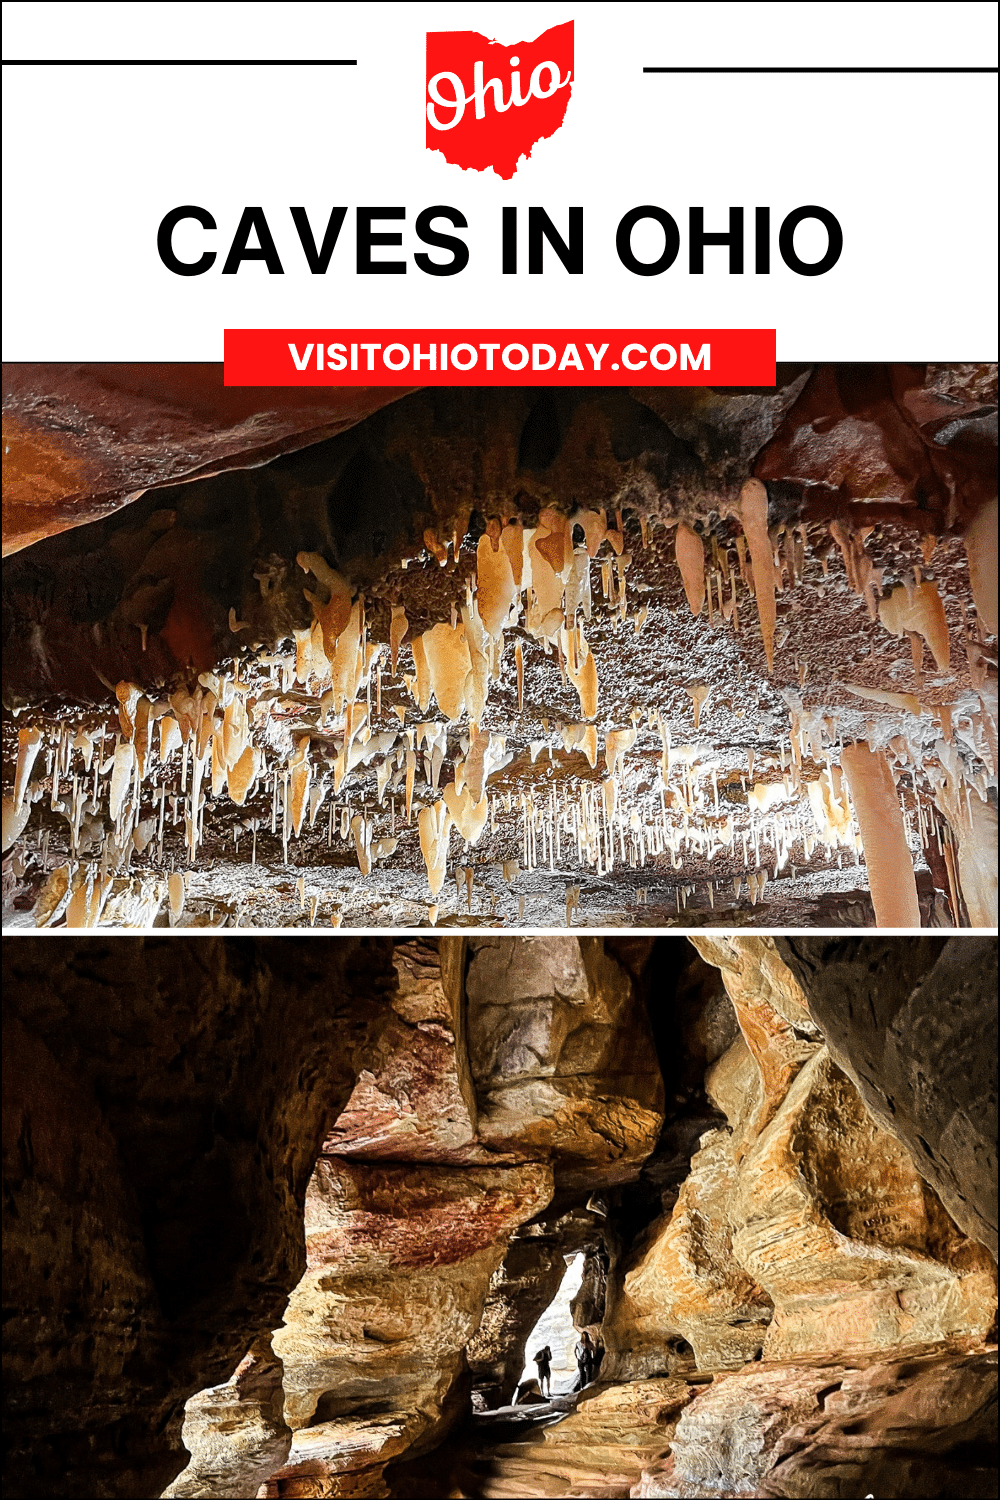 There are some stunning caves in Ohio, situated in beautiful surroundings. Explore nature’s ancient secrets beneath the ground and be amazed by the hidden treasures you will find there. SAVE THIS PIN FOR LATER!